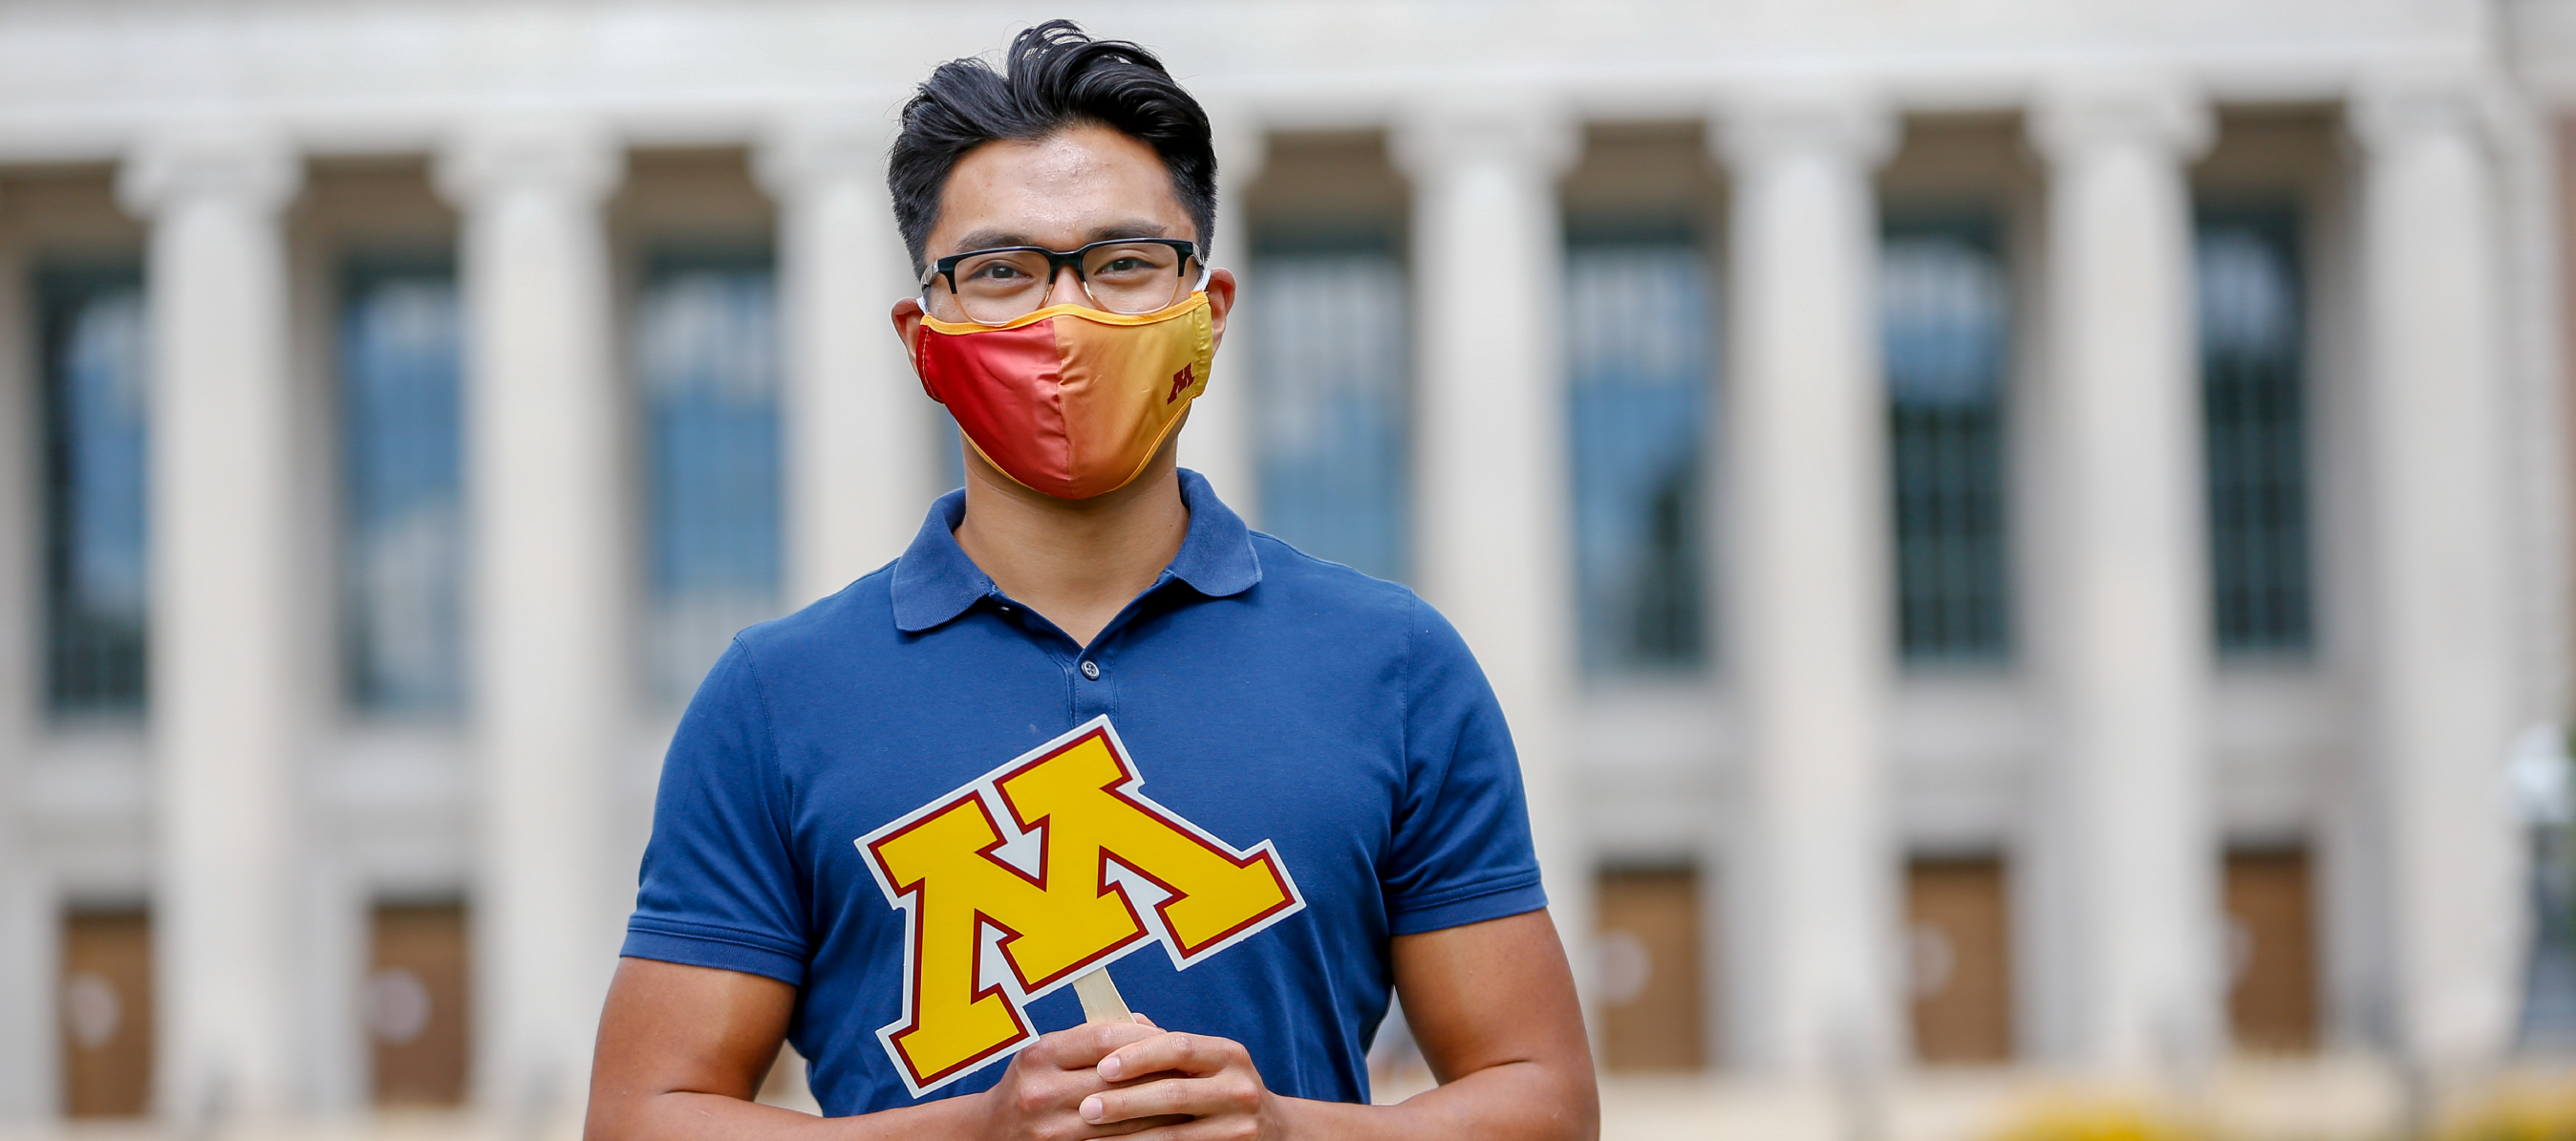 Photo of a student wearing a U of M branded face mask and holding the U of M's signature "M" logo on a stick. Student is outside with a neoclassical academic building in the background.